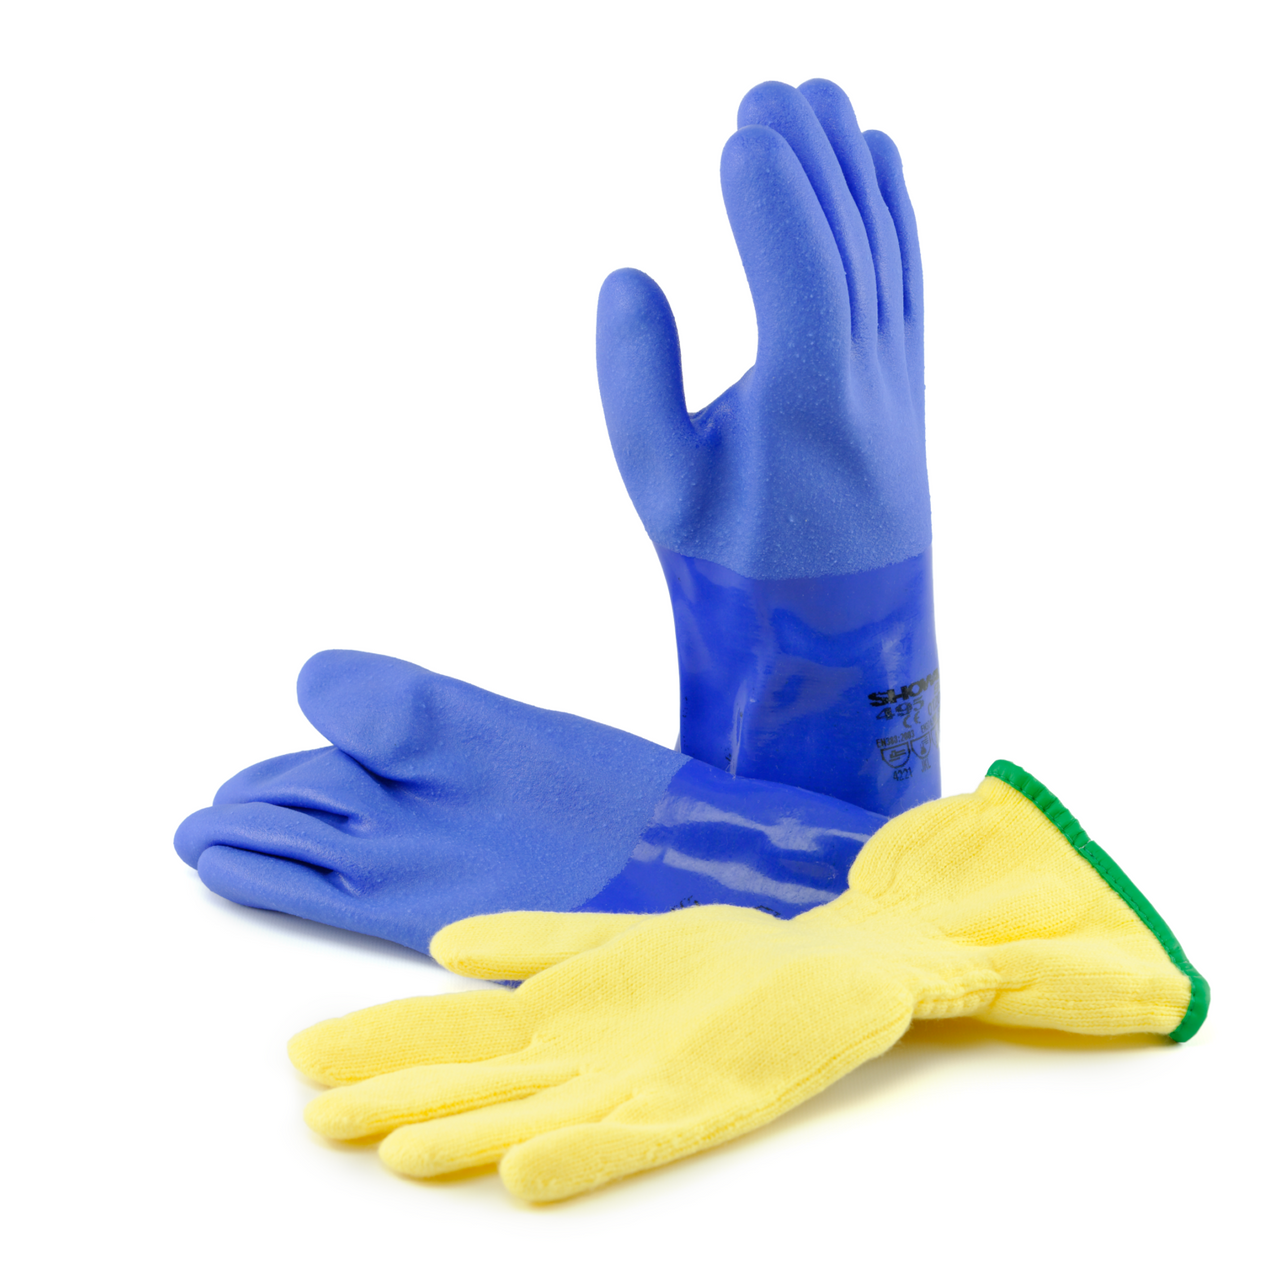 Rolock Blue Dryglove with removable inner liner